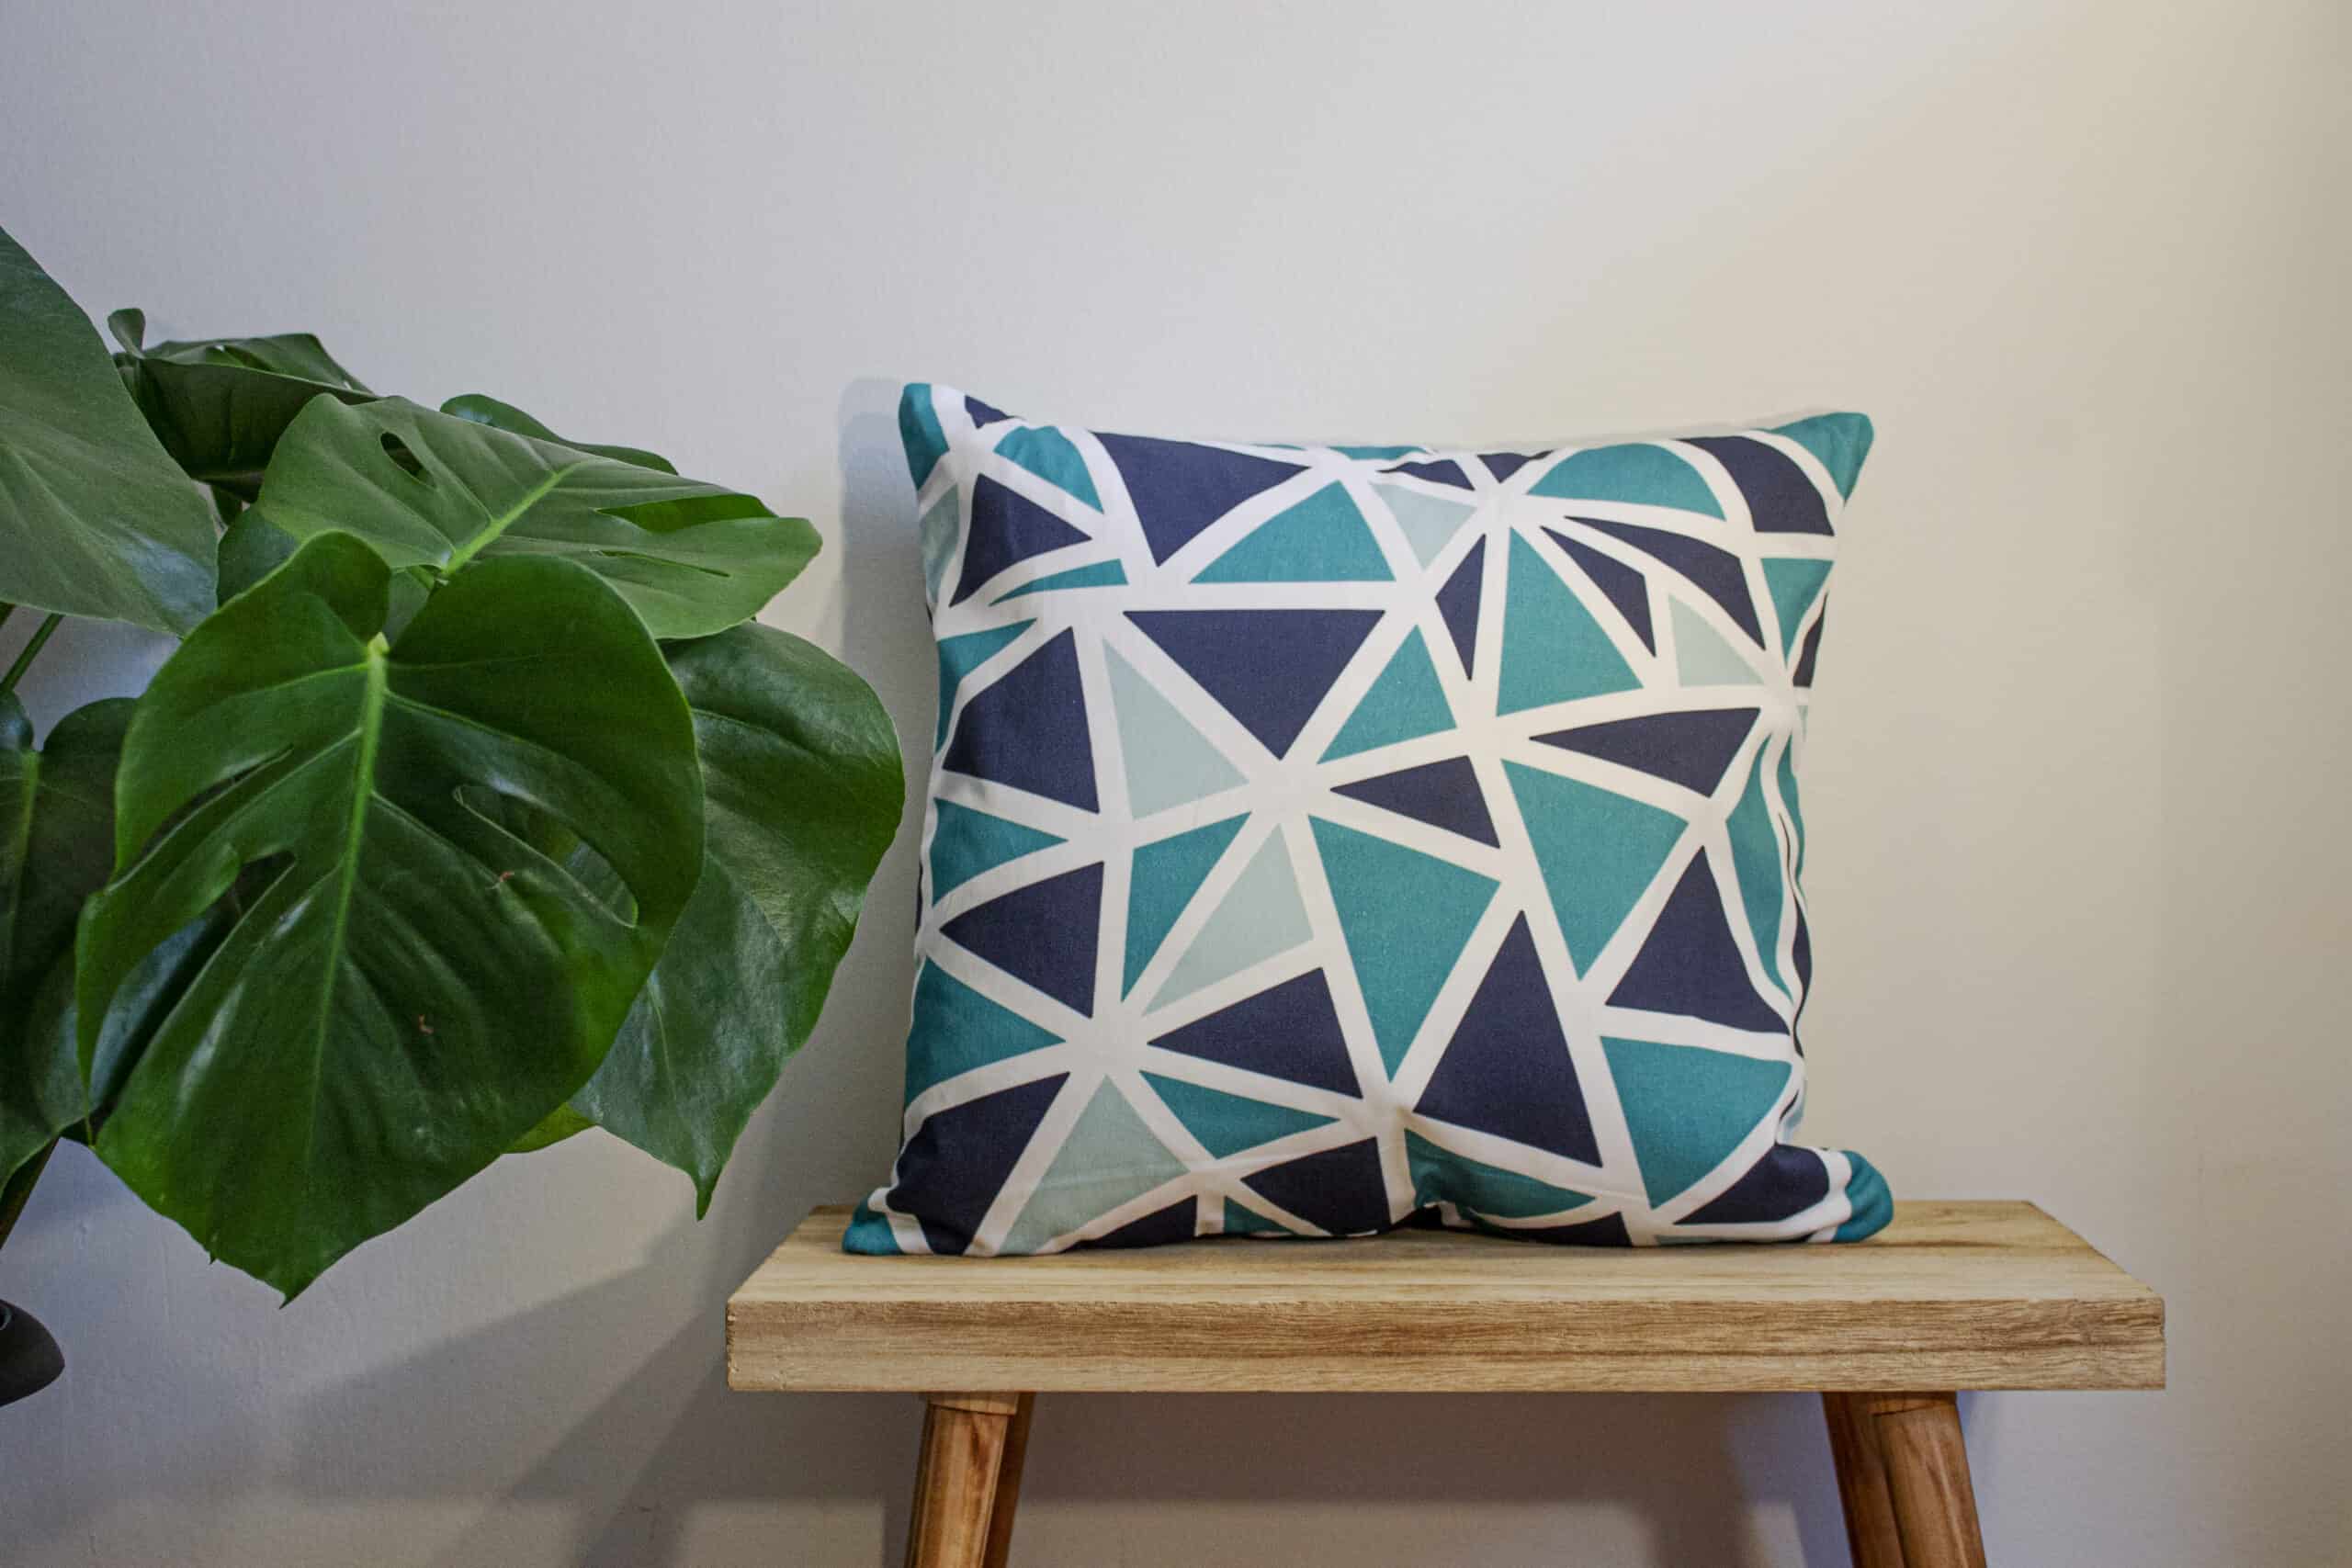 Geometric Throw Cushion Blue and Midnight blue Triangle Pattern Design on a bench with a plant